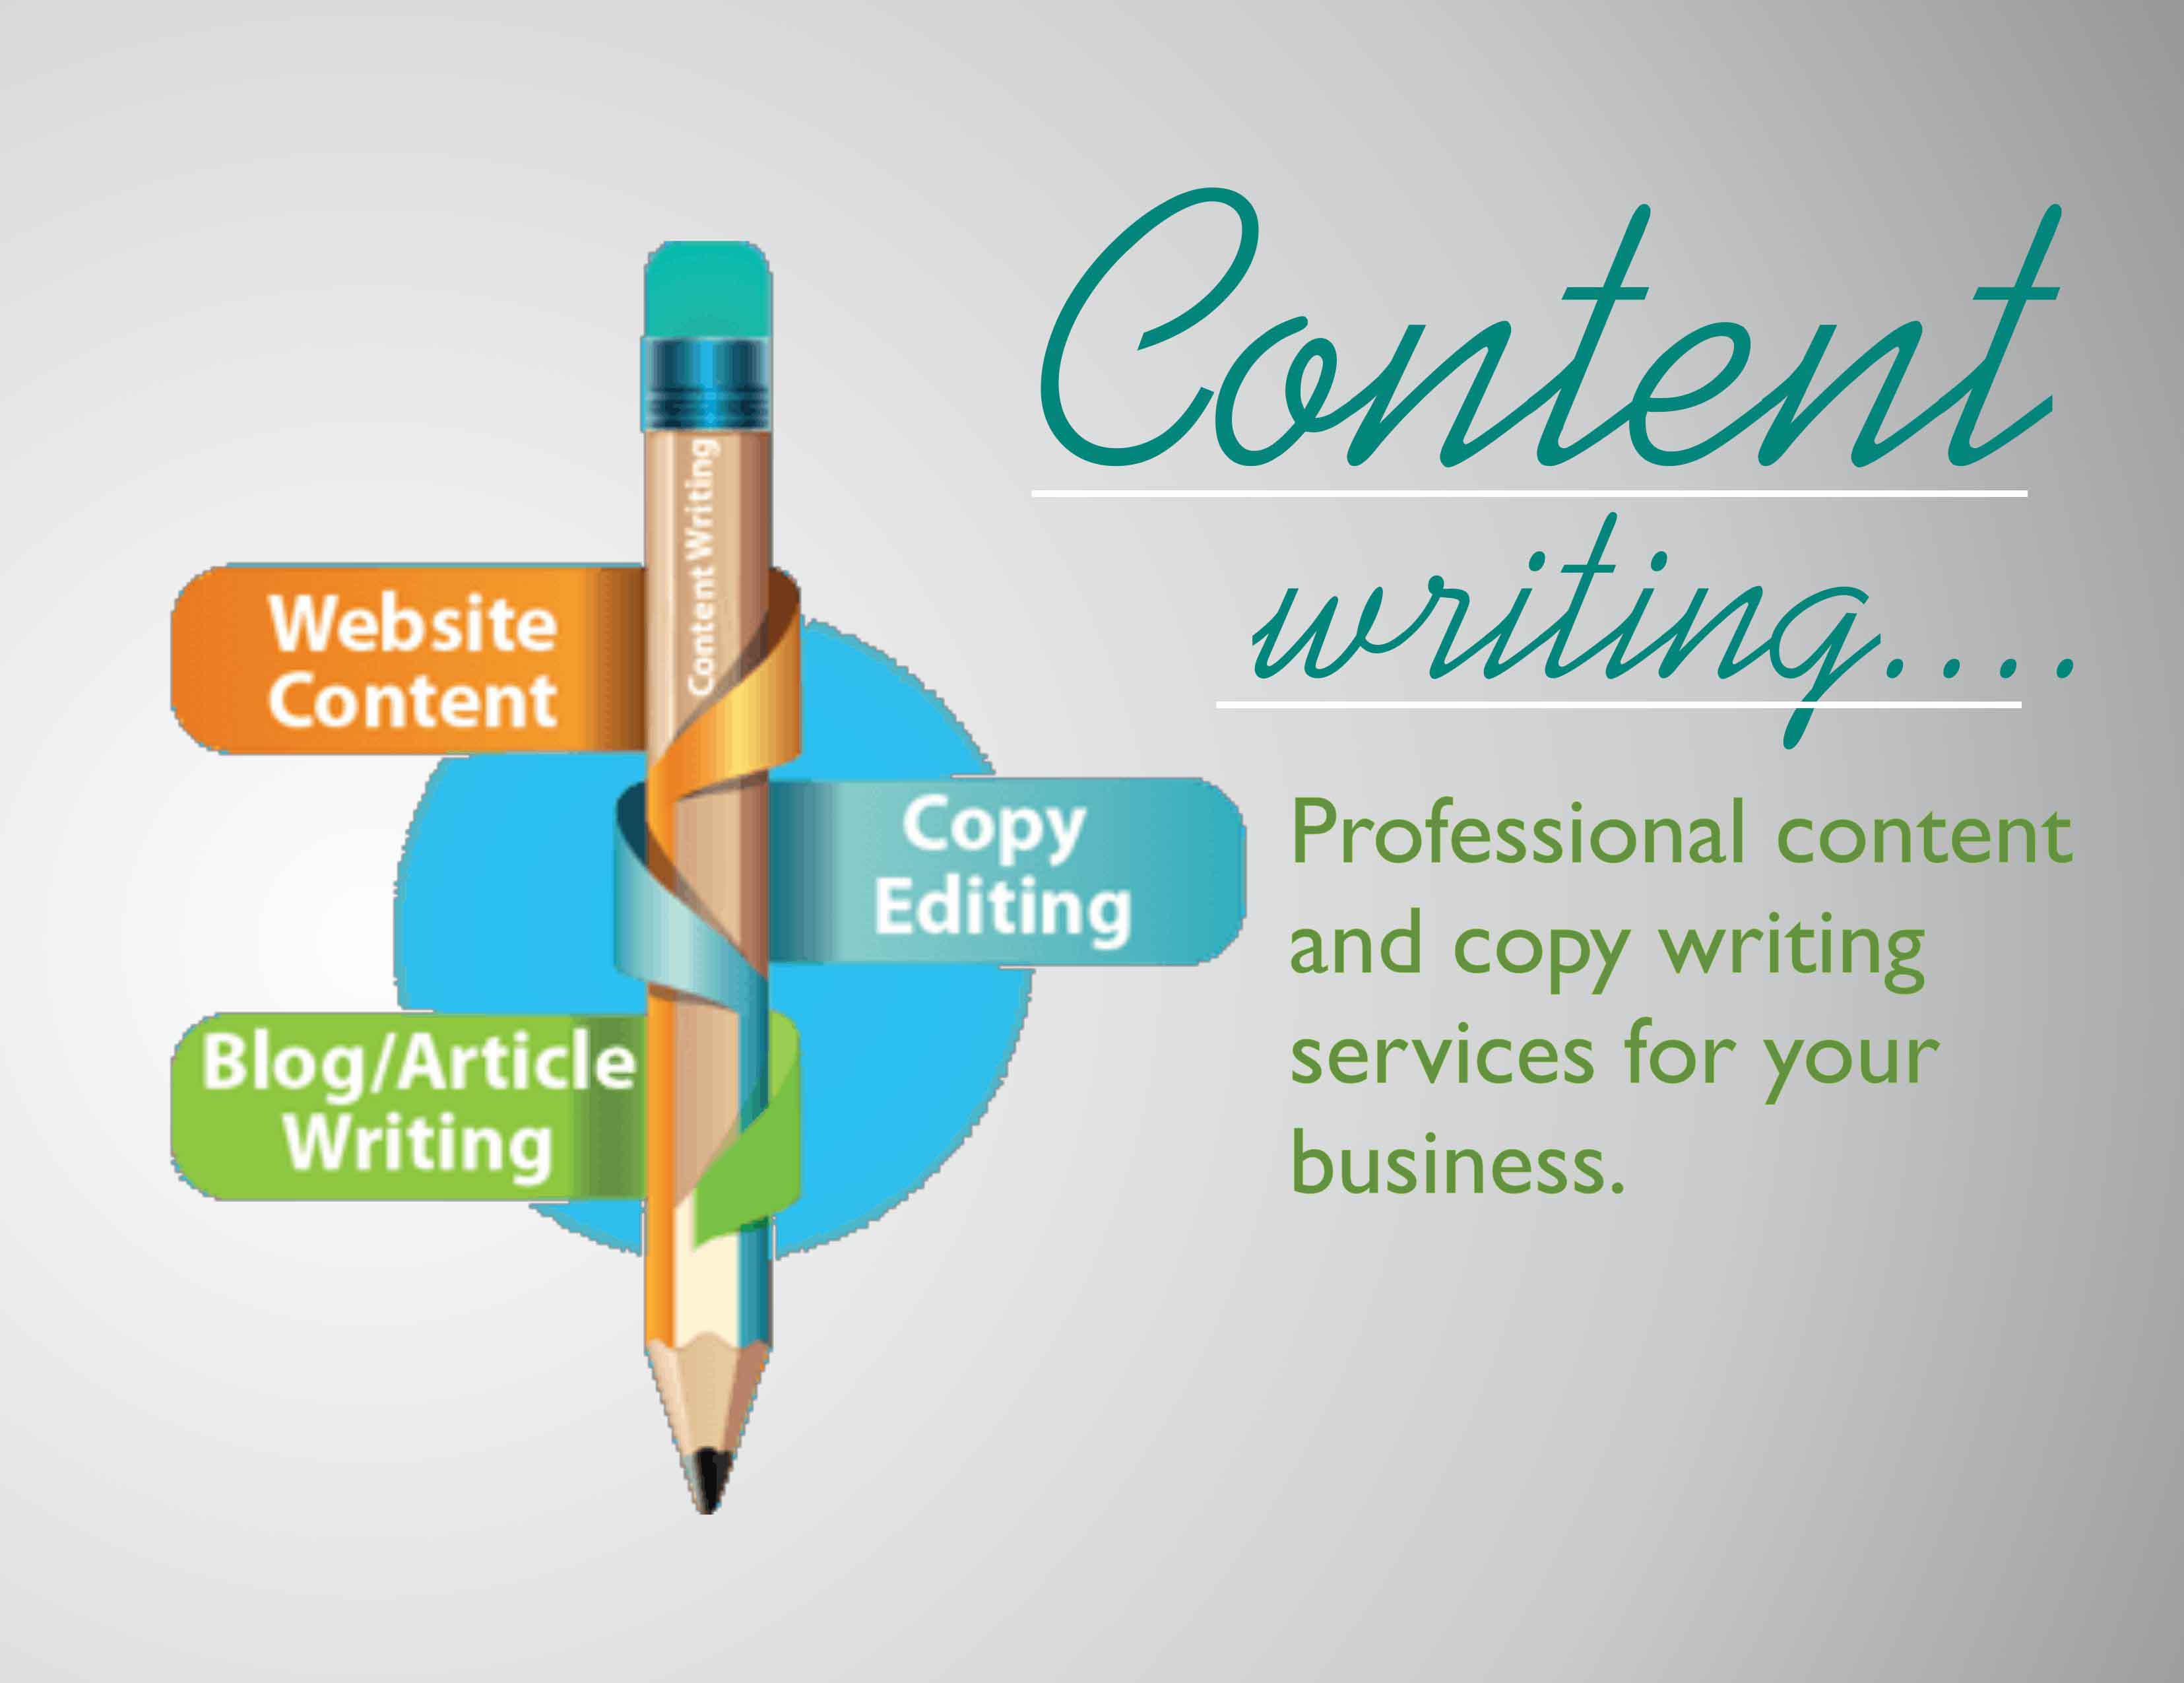 Write 19 quality articles or blog posts, 19 words each by